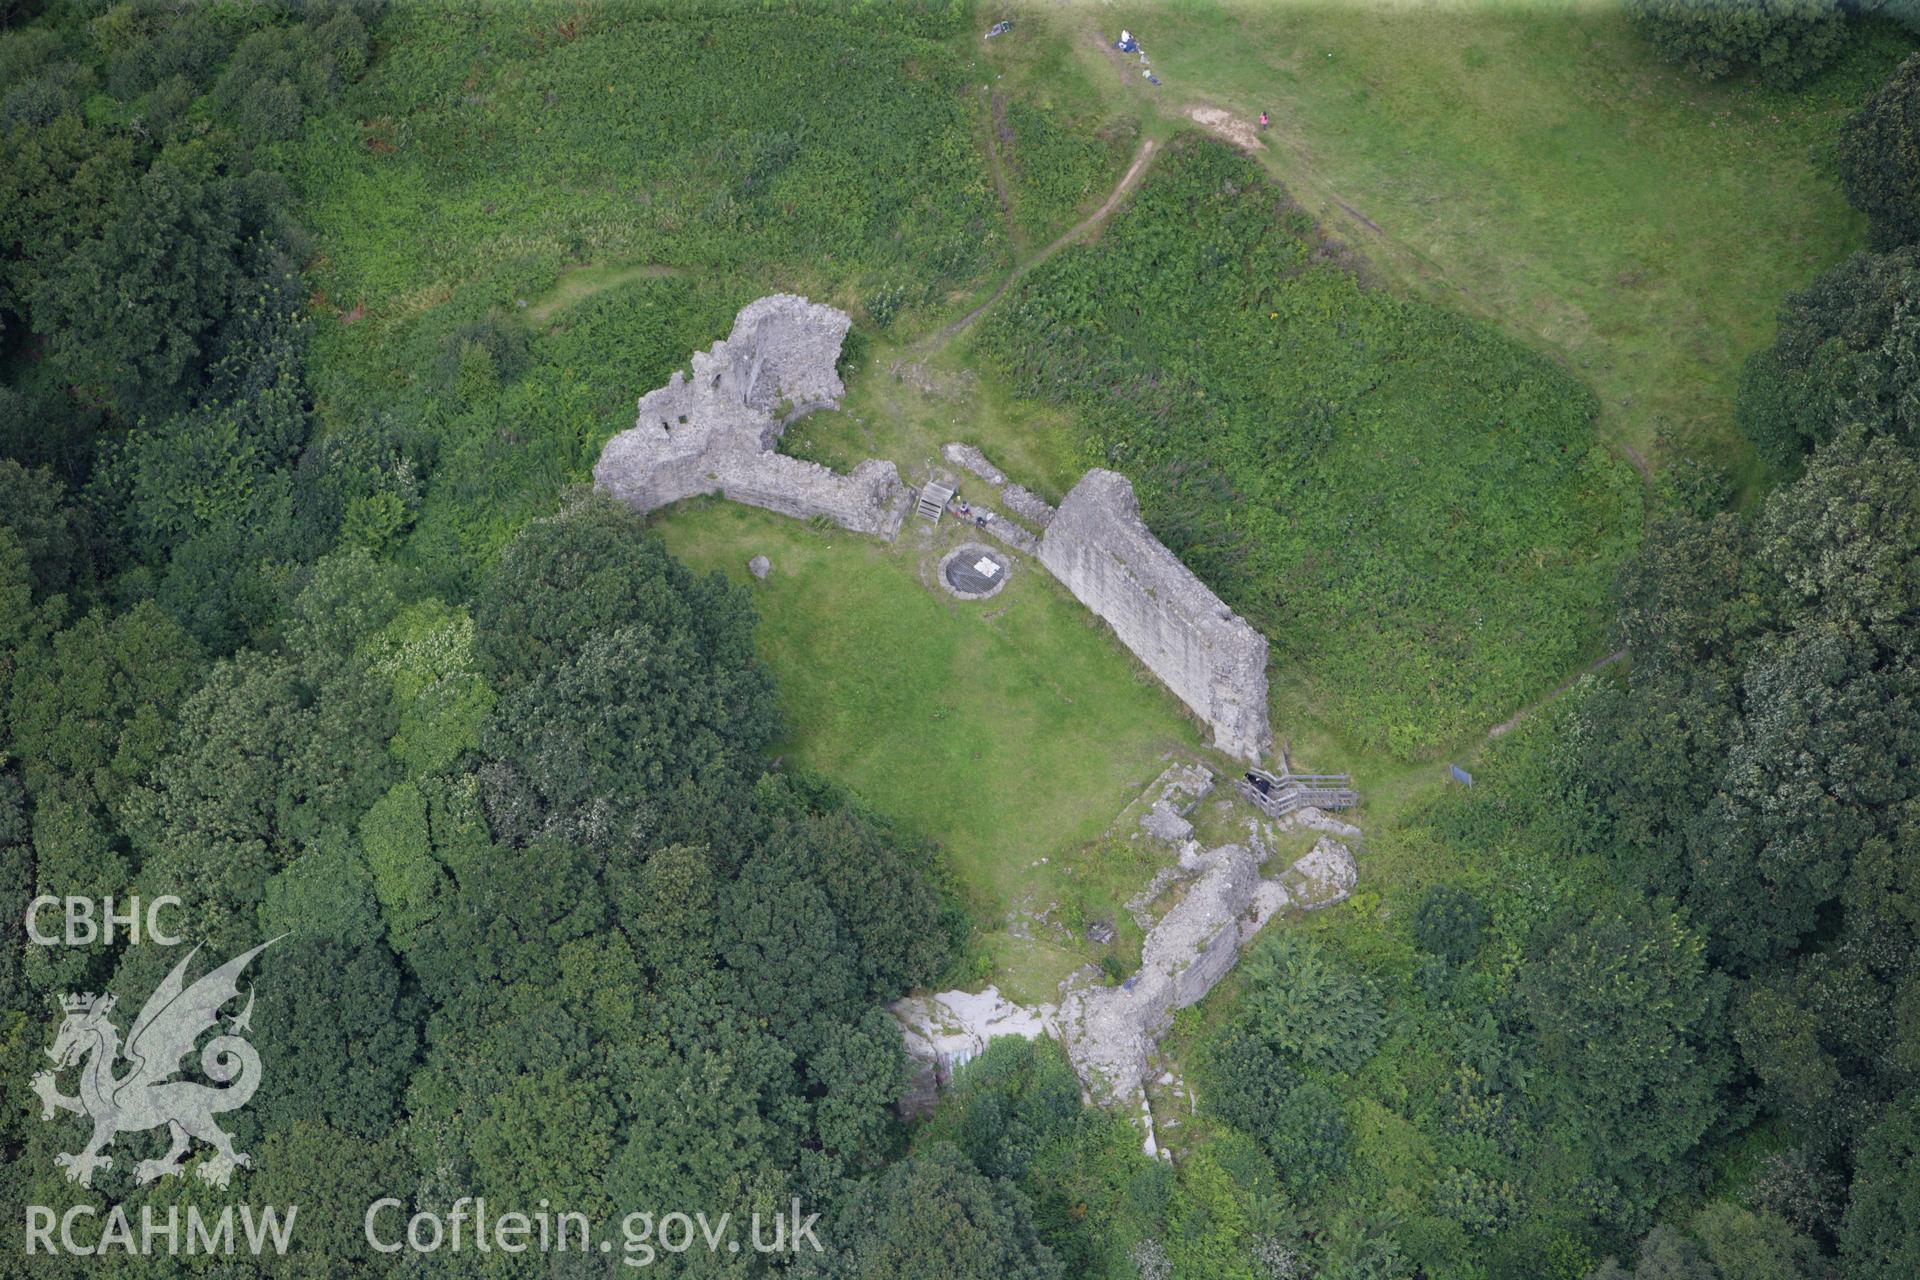 RCAHMW colour oblique aerial photograph of Caergwrle Castle. Taken on 30 July 2009 by Toby Driver